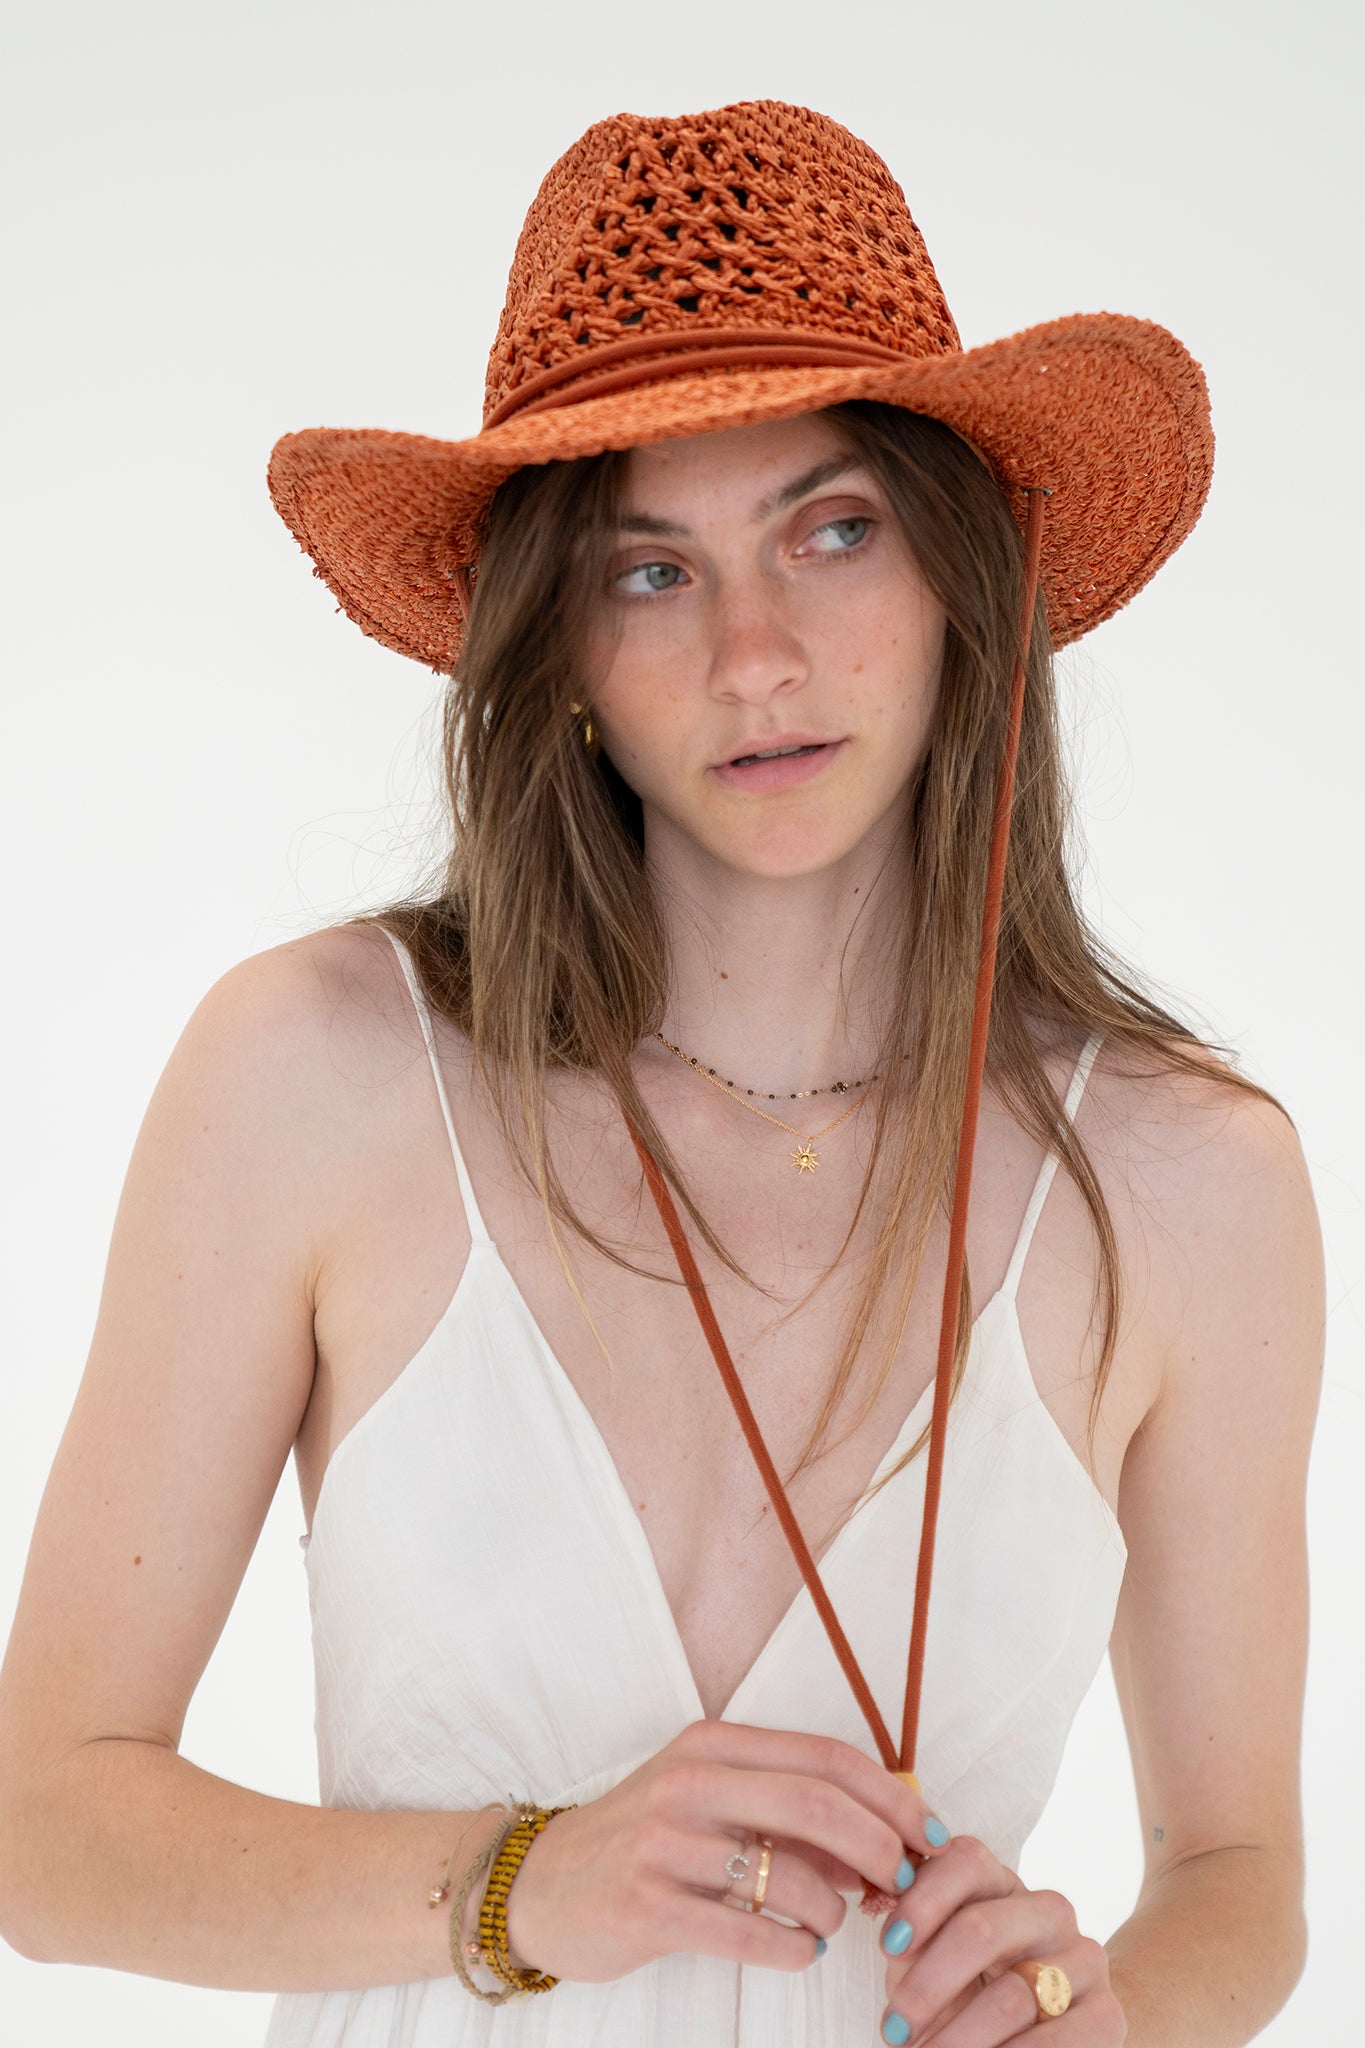 View 1 of Clay Cowboy Hat, a Hats from Larrea Cove. Detail: Get beach-ready with this awesome Cla...